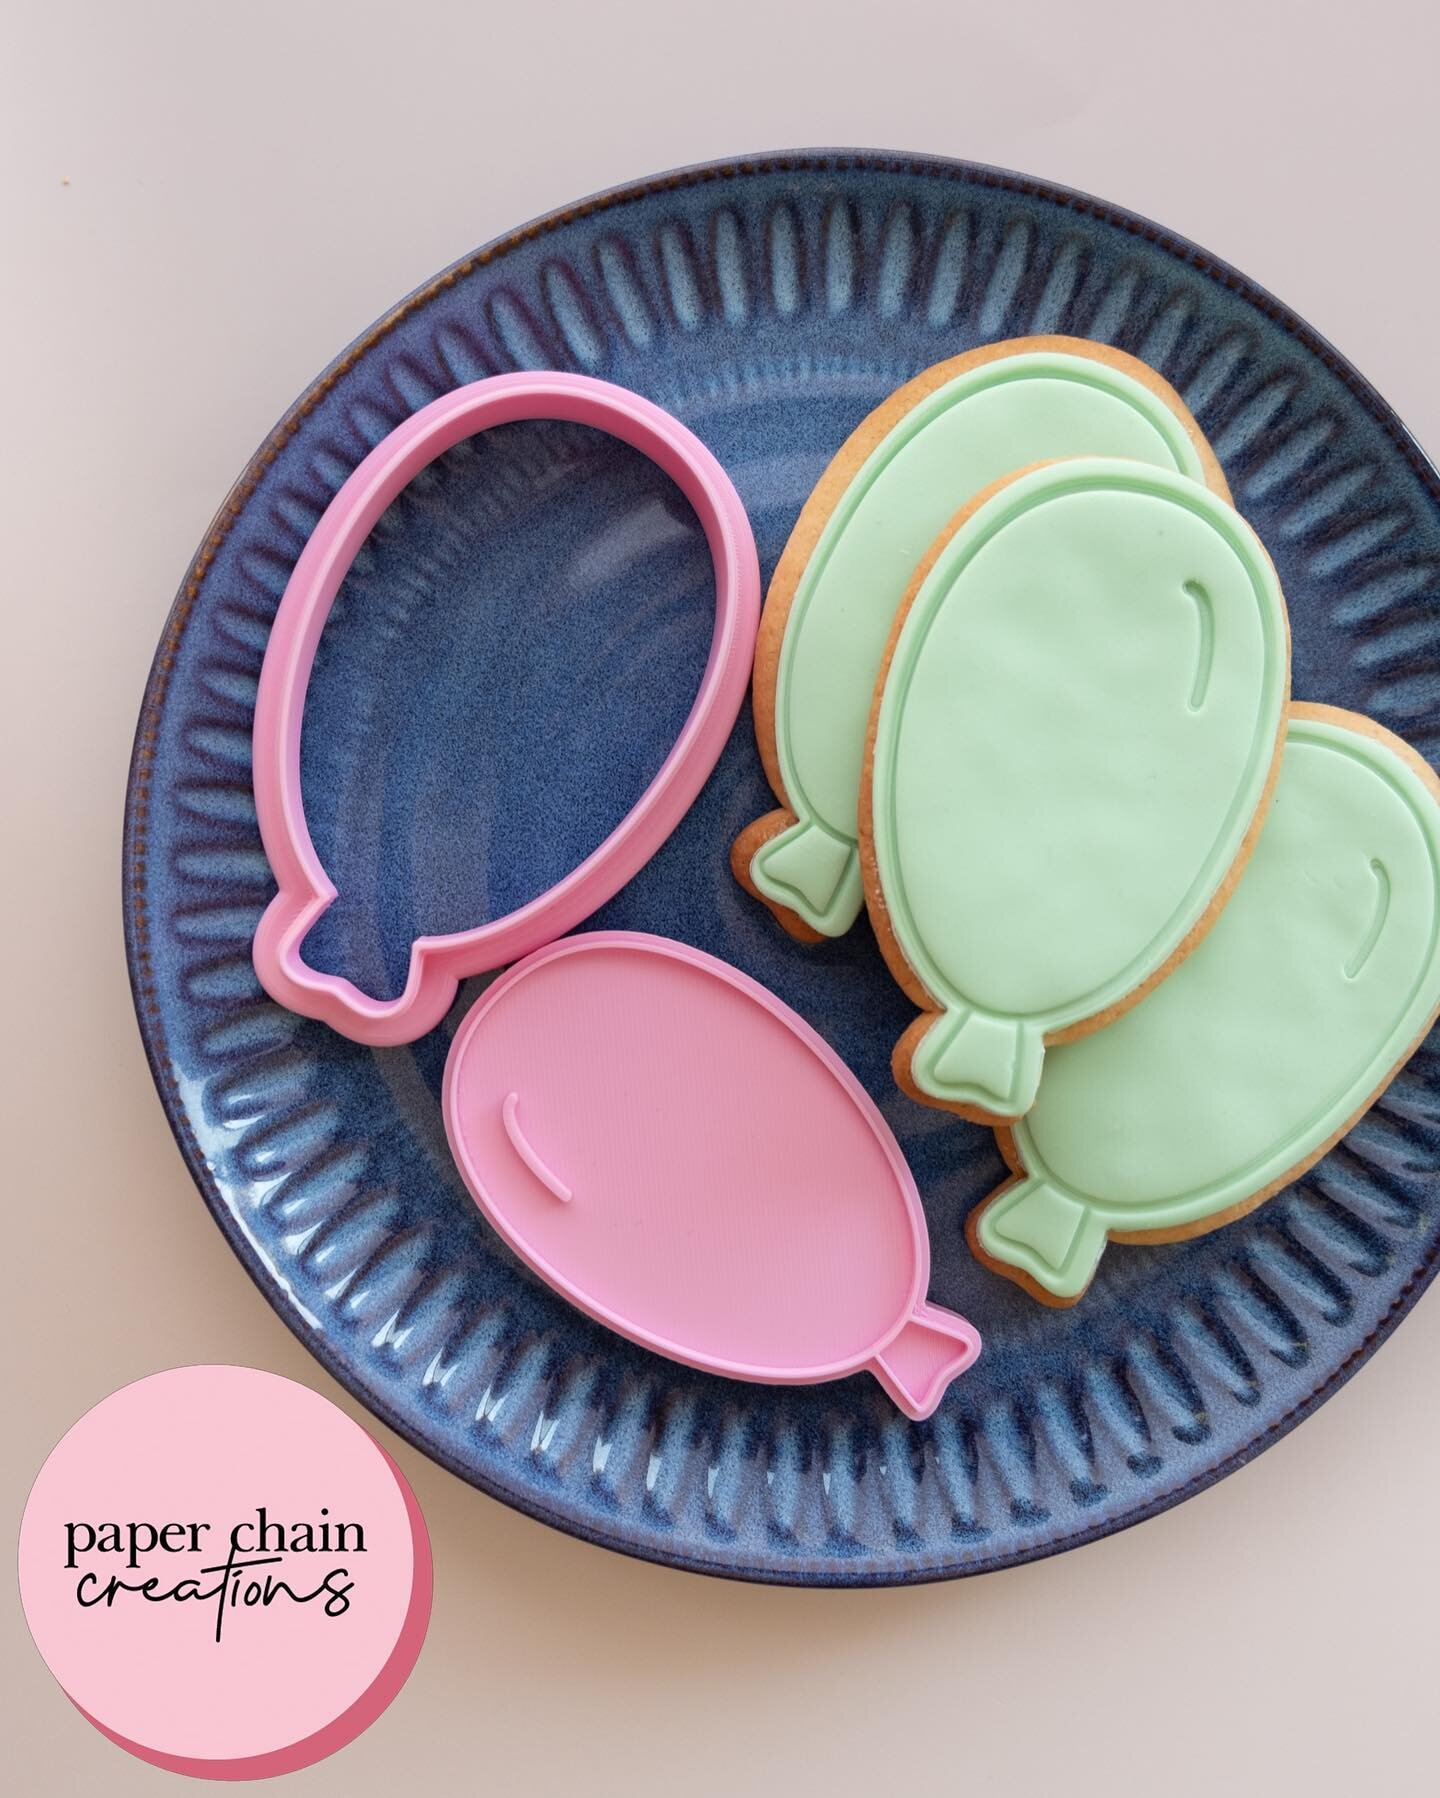 💕 narrow balloon 💕
.
I honestly would make every shape of balloon possible into cookie form! Here is a new addition to the birthday cookie family 💕
.
#fondantcookies #cookiecutters #cookies #paperchaincreations #customcookies #baking #fondant #coo